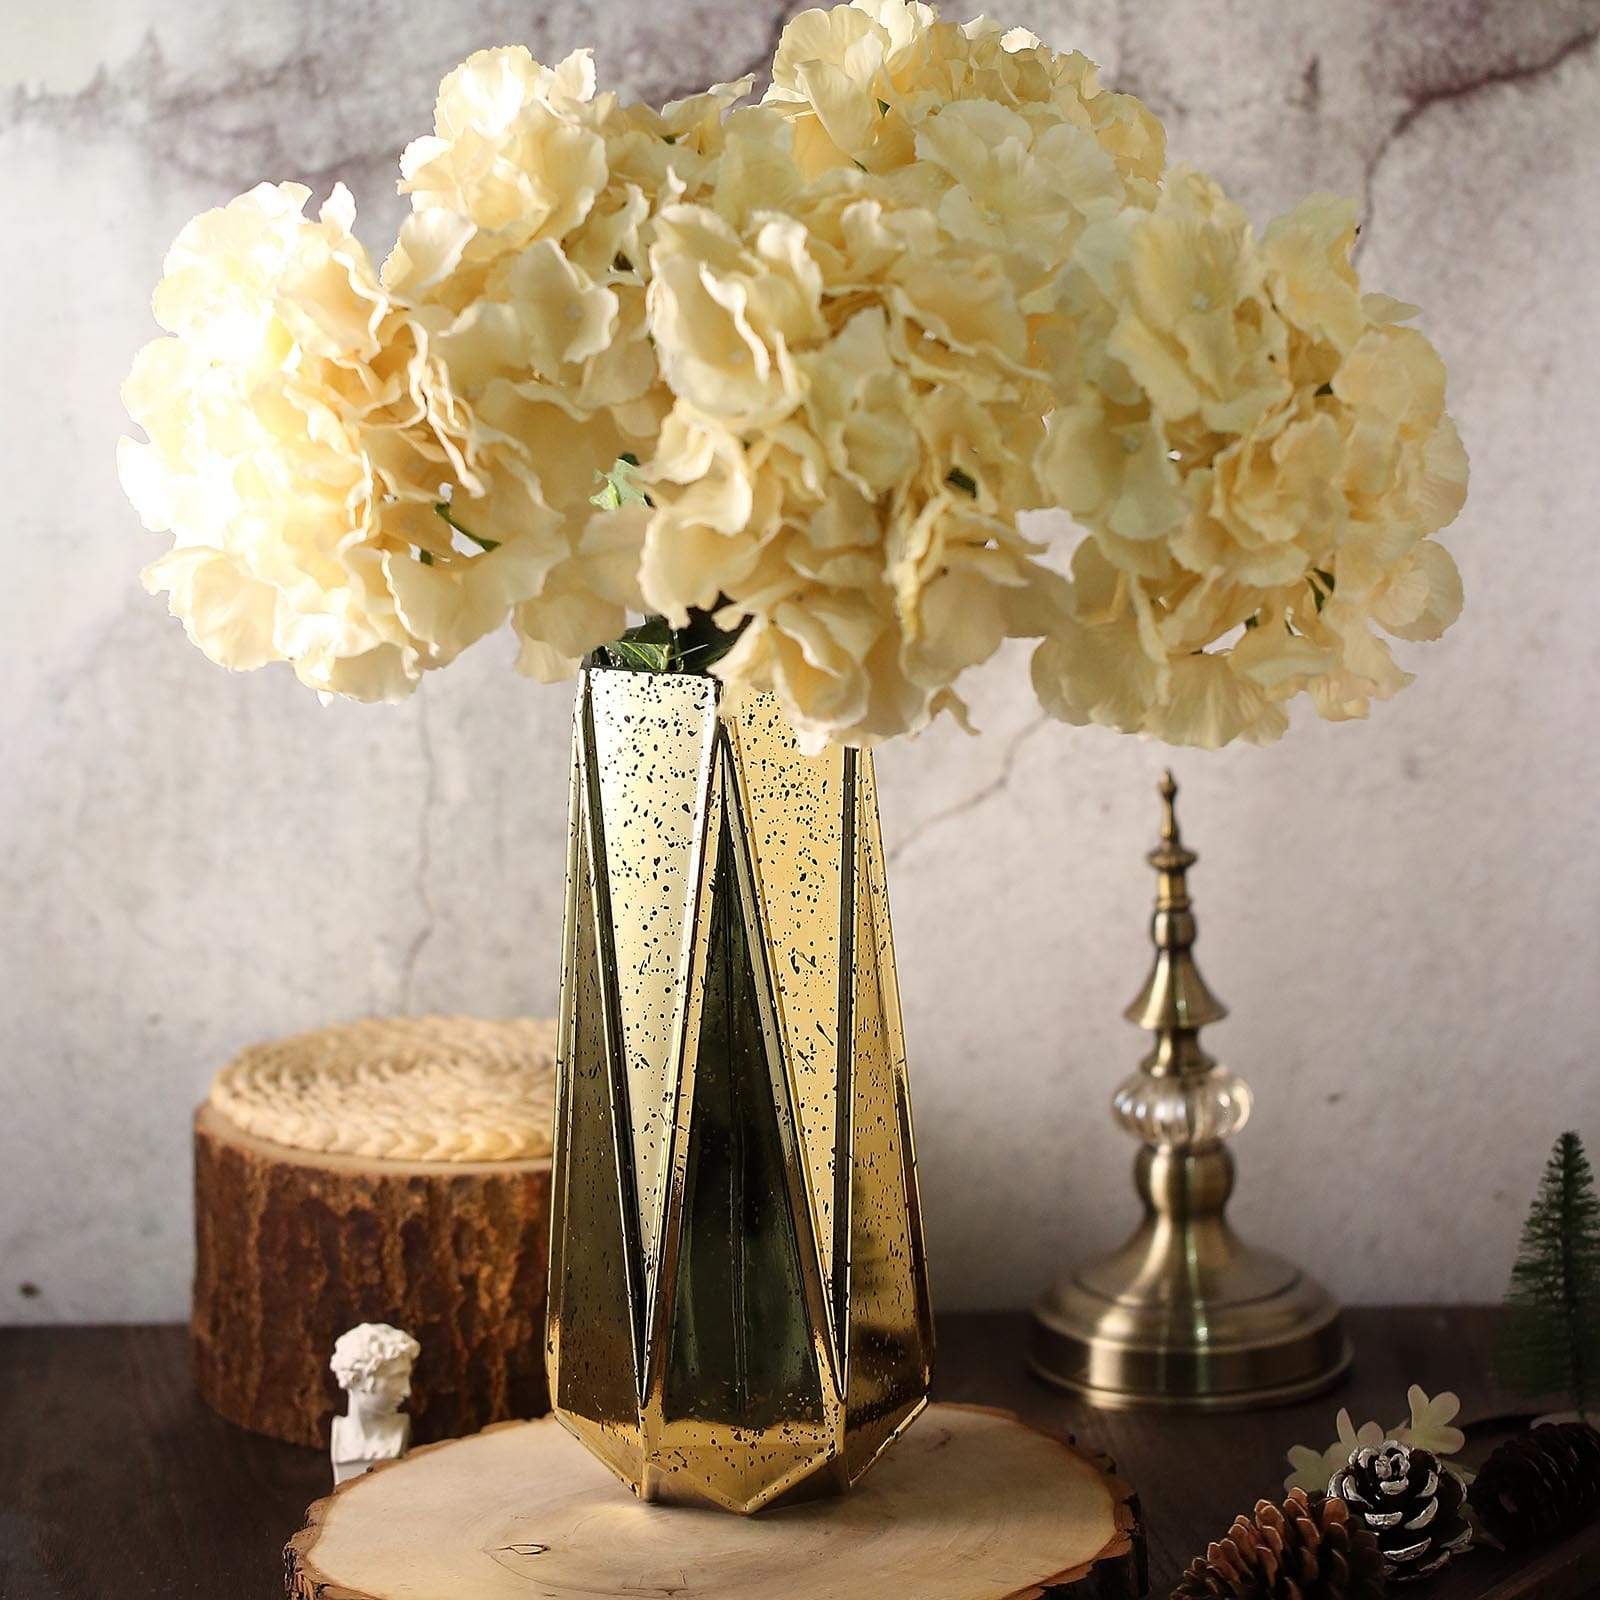 2 pcs 7 in tall Gold Geometric Mercury Glass Vases Centerpieces